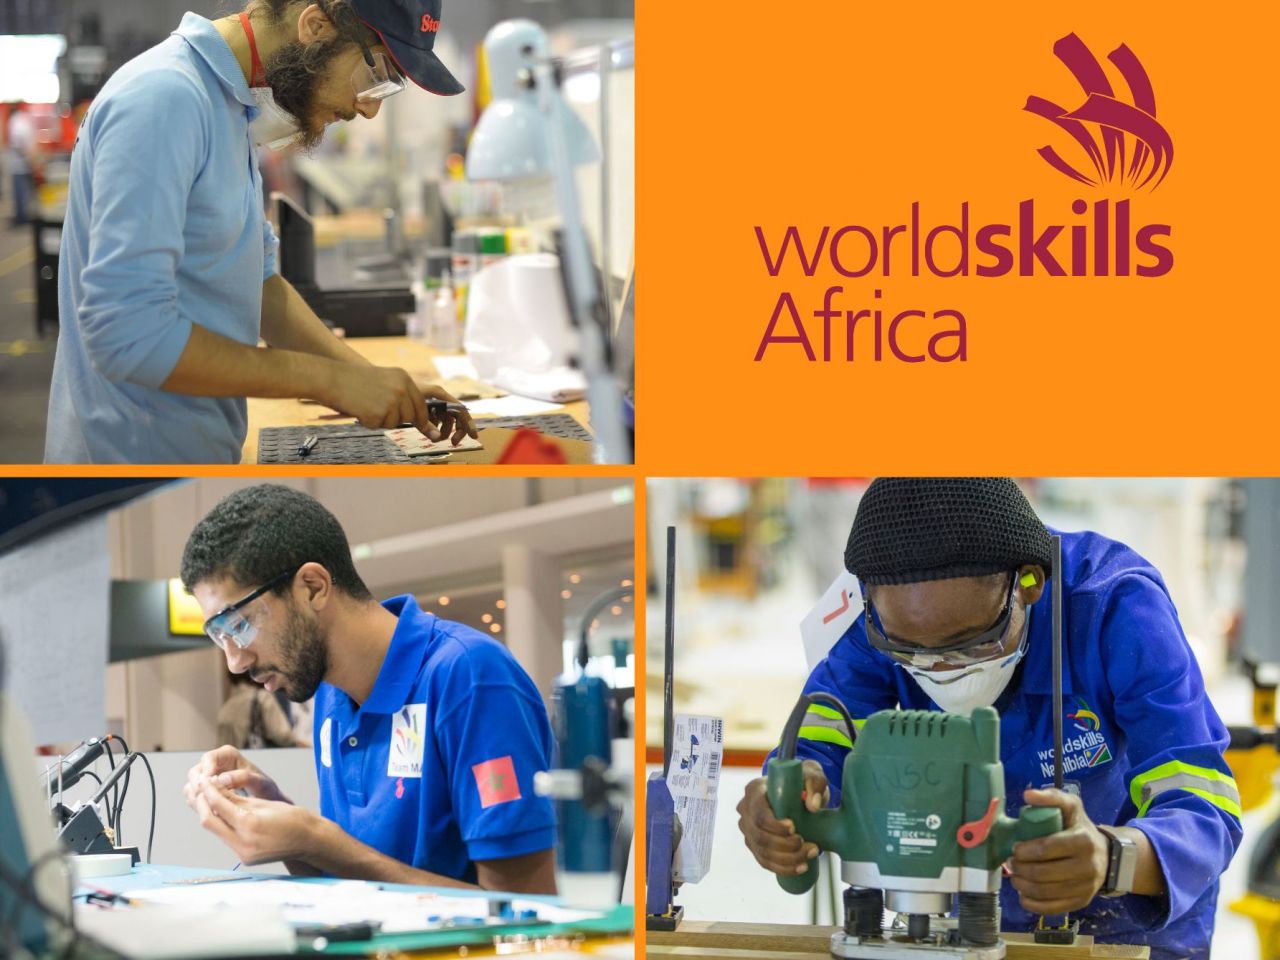 Countdown begins to the launch of WorldSkills Africa